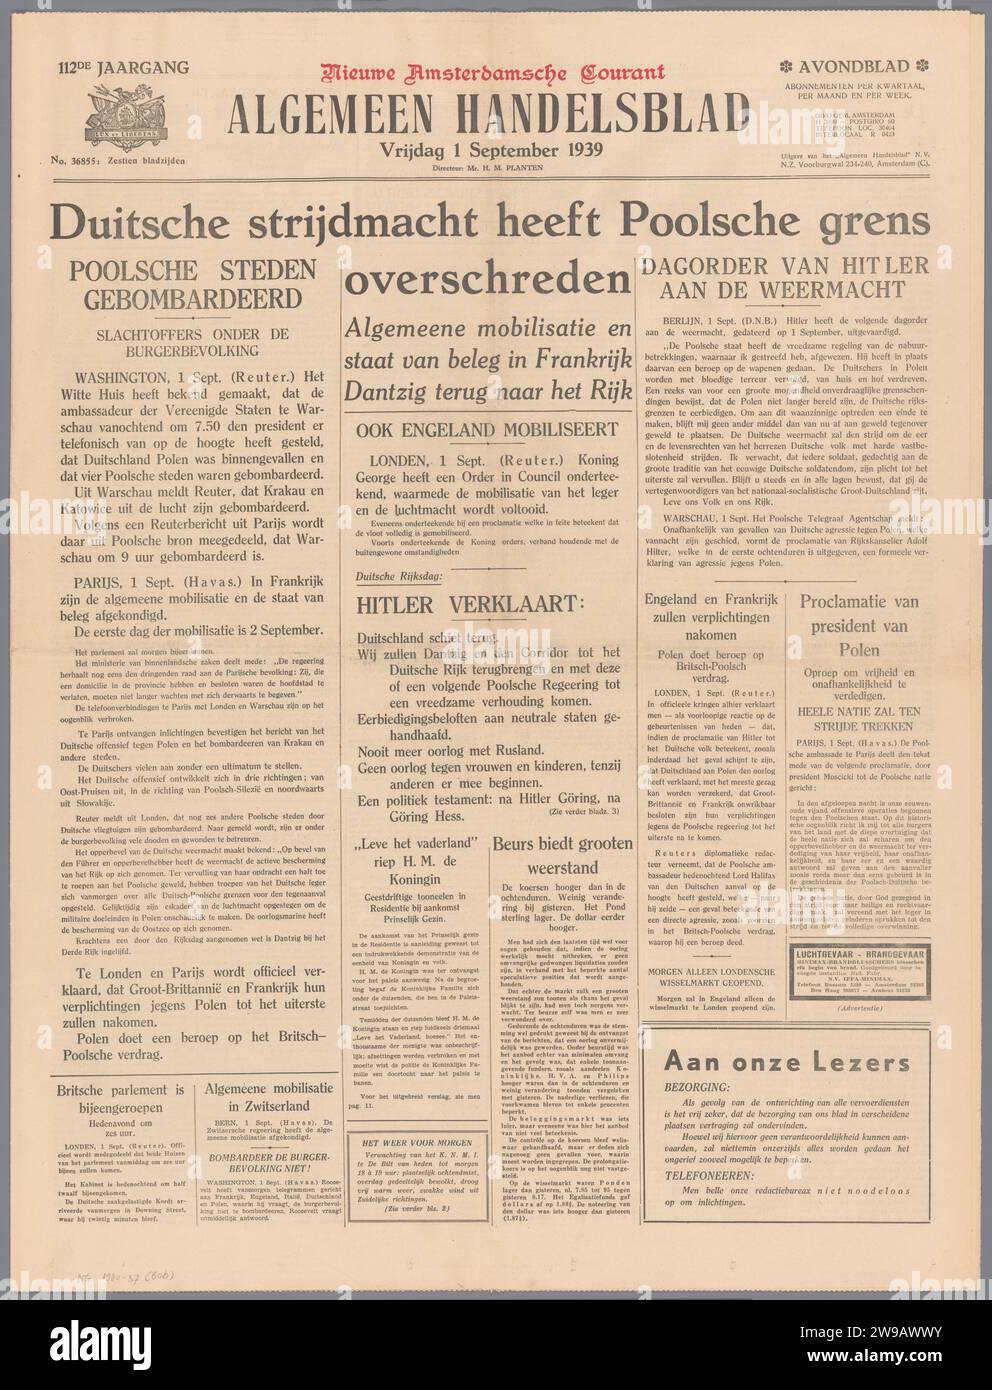 Algemeen Handelsblad, Algemeen Handelsblad, 1939  Newspaper on the German invasion in Poland, 8 pp (of 16) no. 36855 of the 112nd volume of the Algemeen Handelsblad. Amsterdam paper printing  Poland Stock Photo